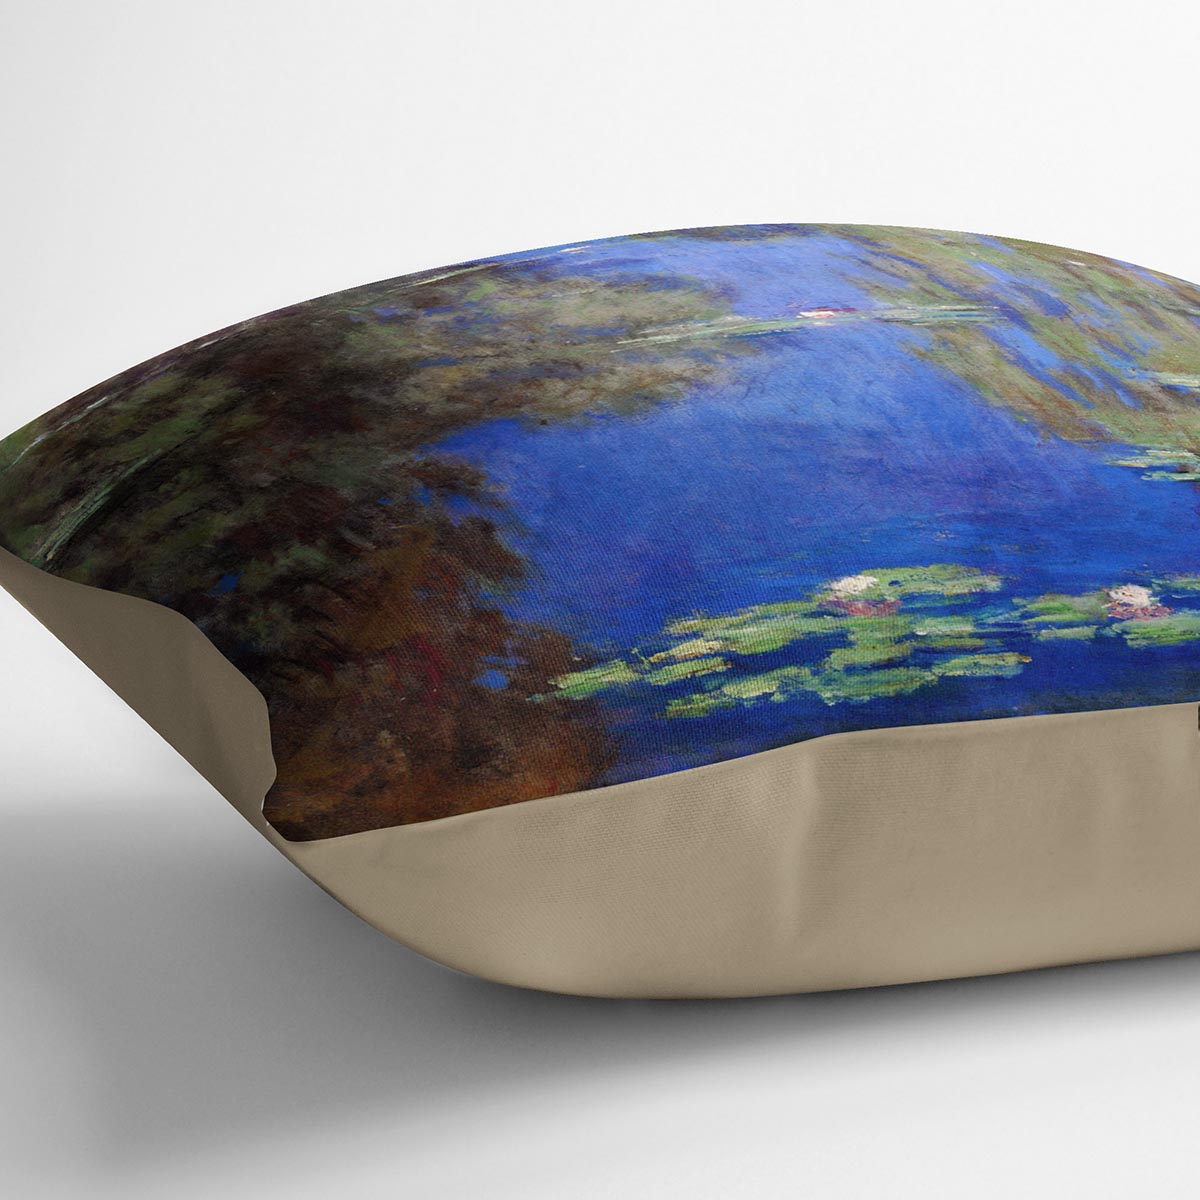 Water Lilies 6 By Manet Cushion